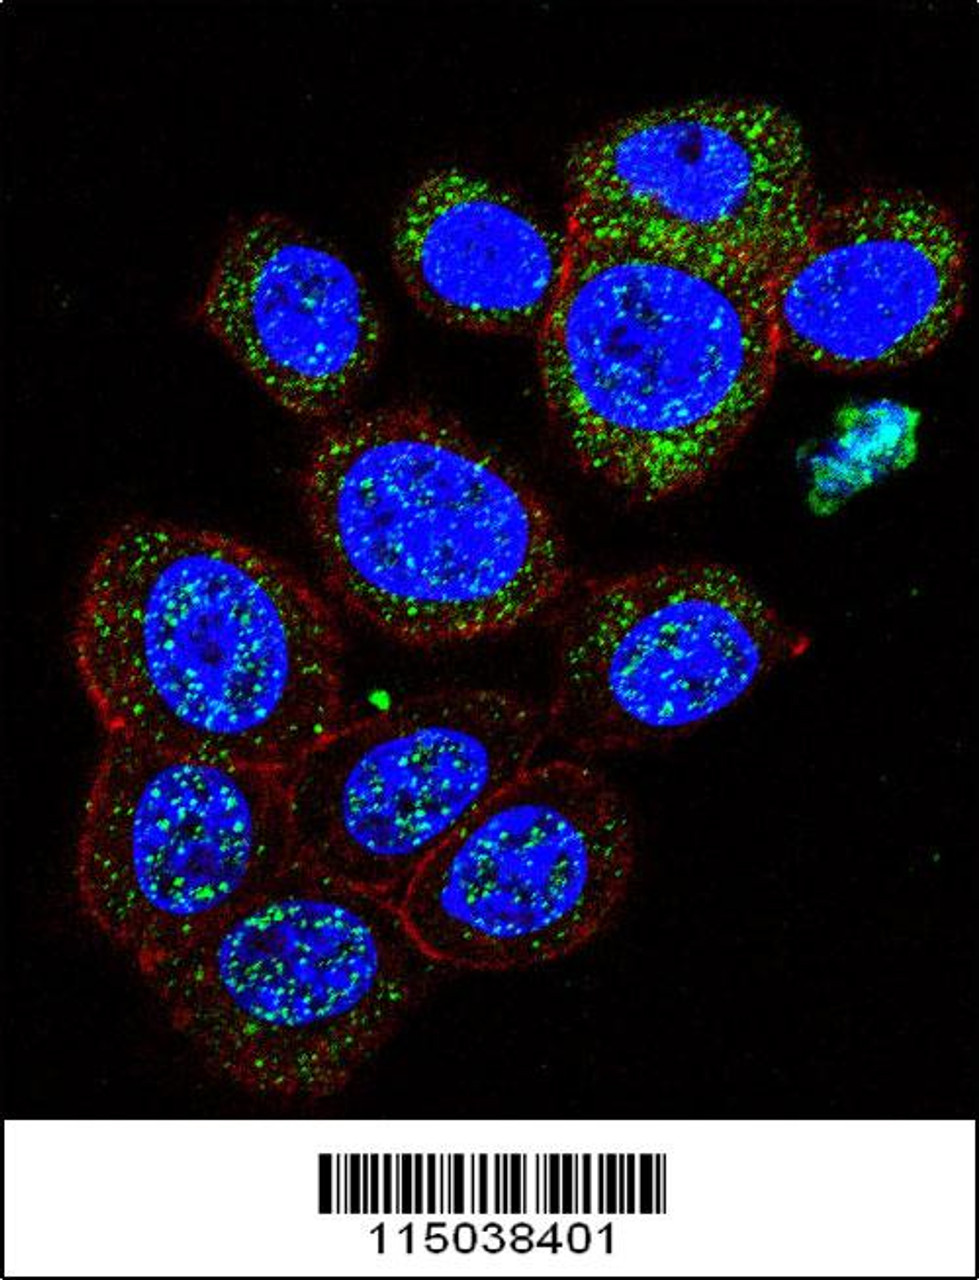 Confocal immunofluorescent analysis of GAL Antibody with 293 cell followed by Alexa Fluor 488-conjugated goat anti-rabbit lgG (green) . Actin filaments have been labeled with Alexa Fluor 555 phalloidin (red) .DAPI was used to stain the cell nuclear (blue) .